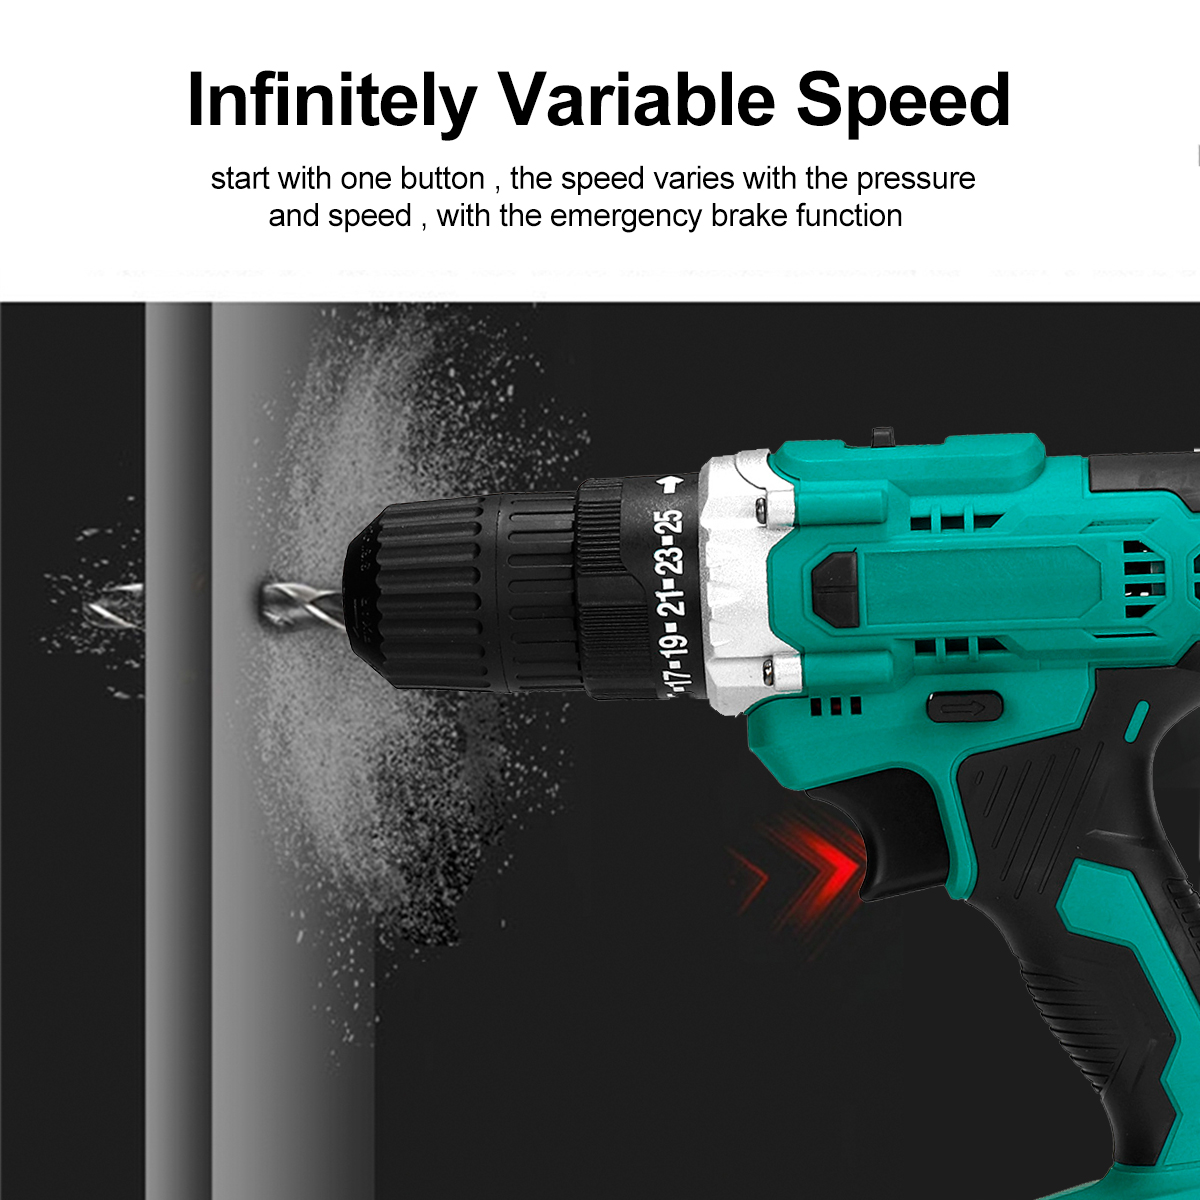 Multifunctional-3In1-Cordless-Electric-Screw-Driver-Drill-Wrench-38-Inch-Chuck-Rechargeable-Impact-D-1837415-4